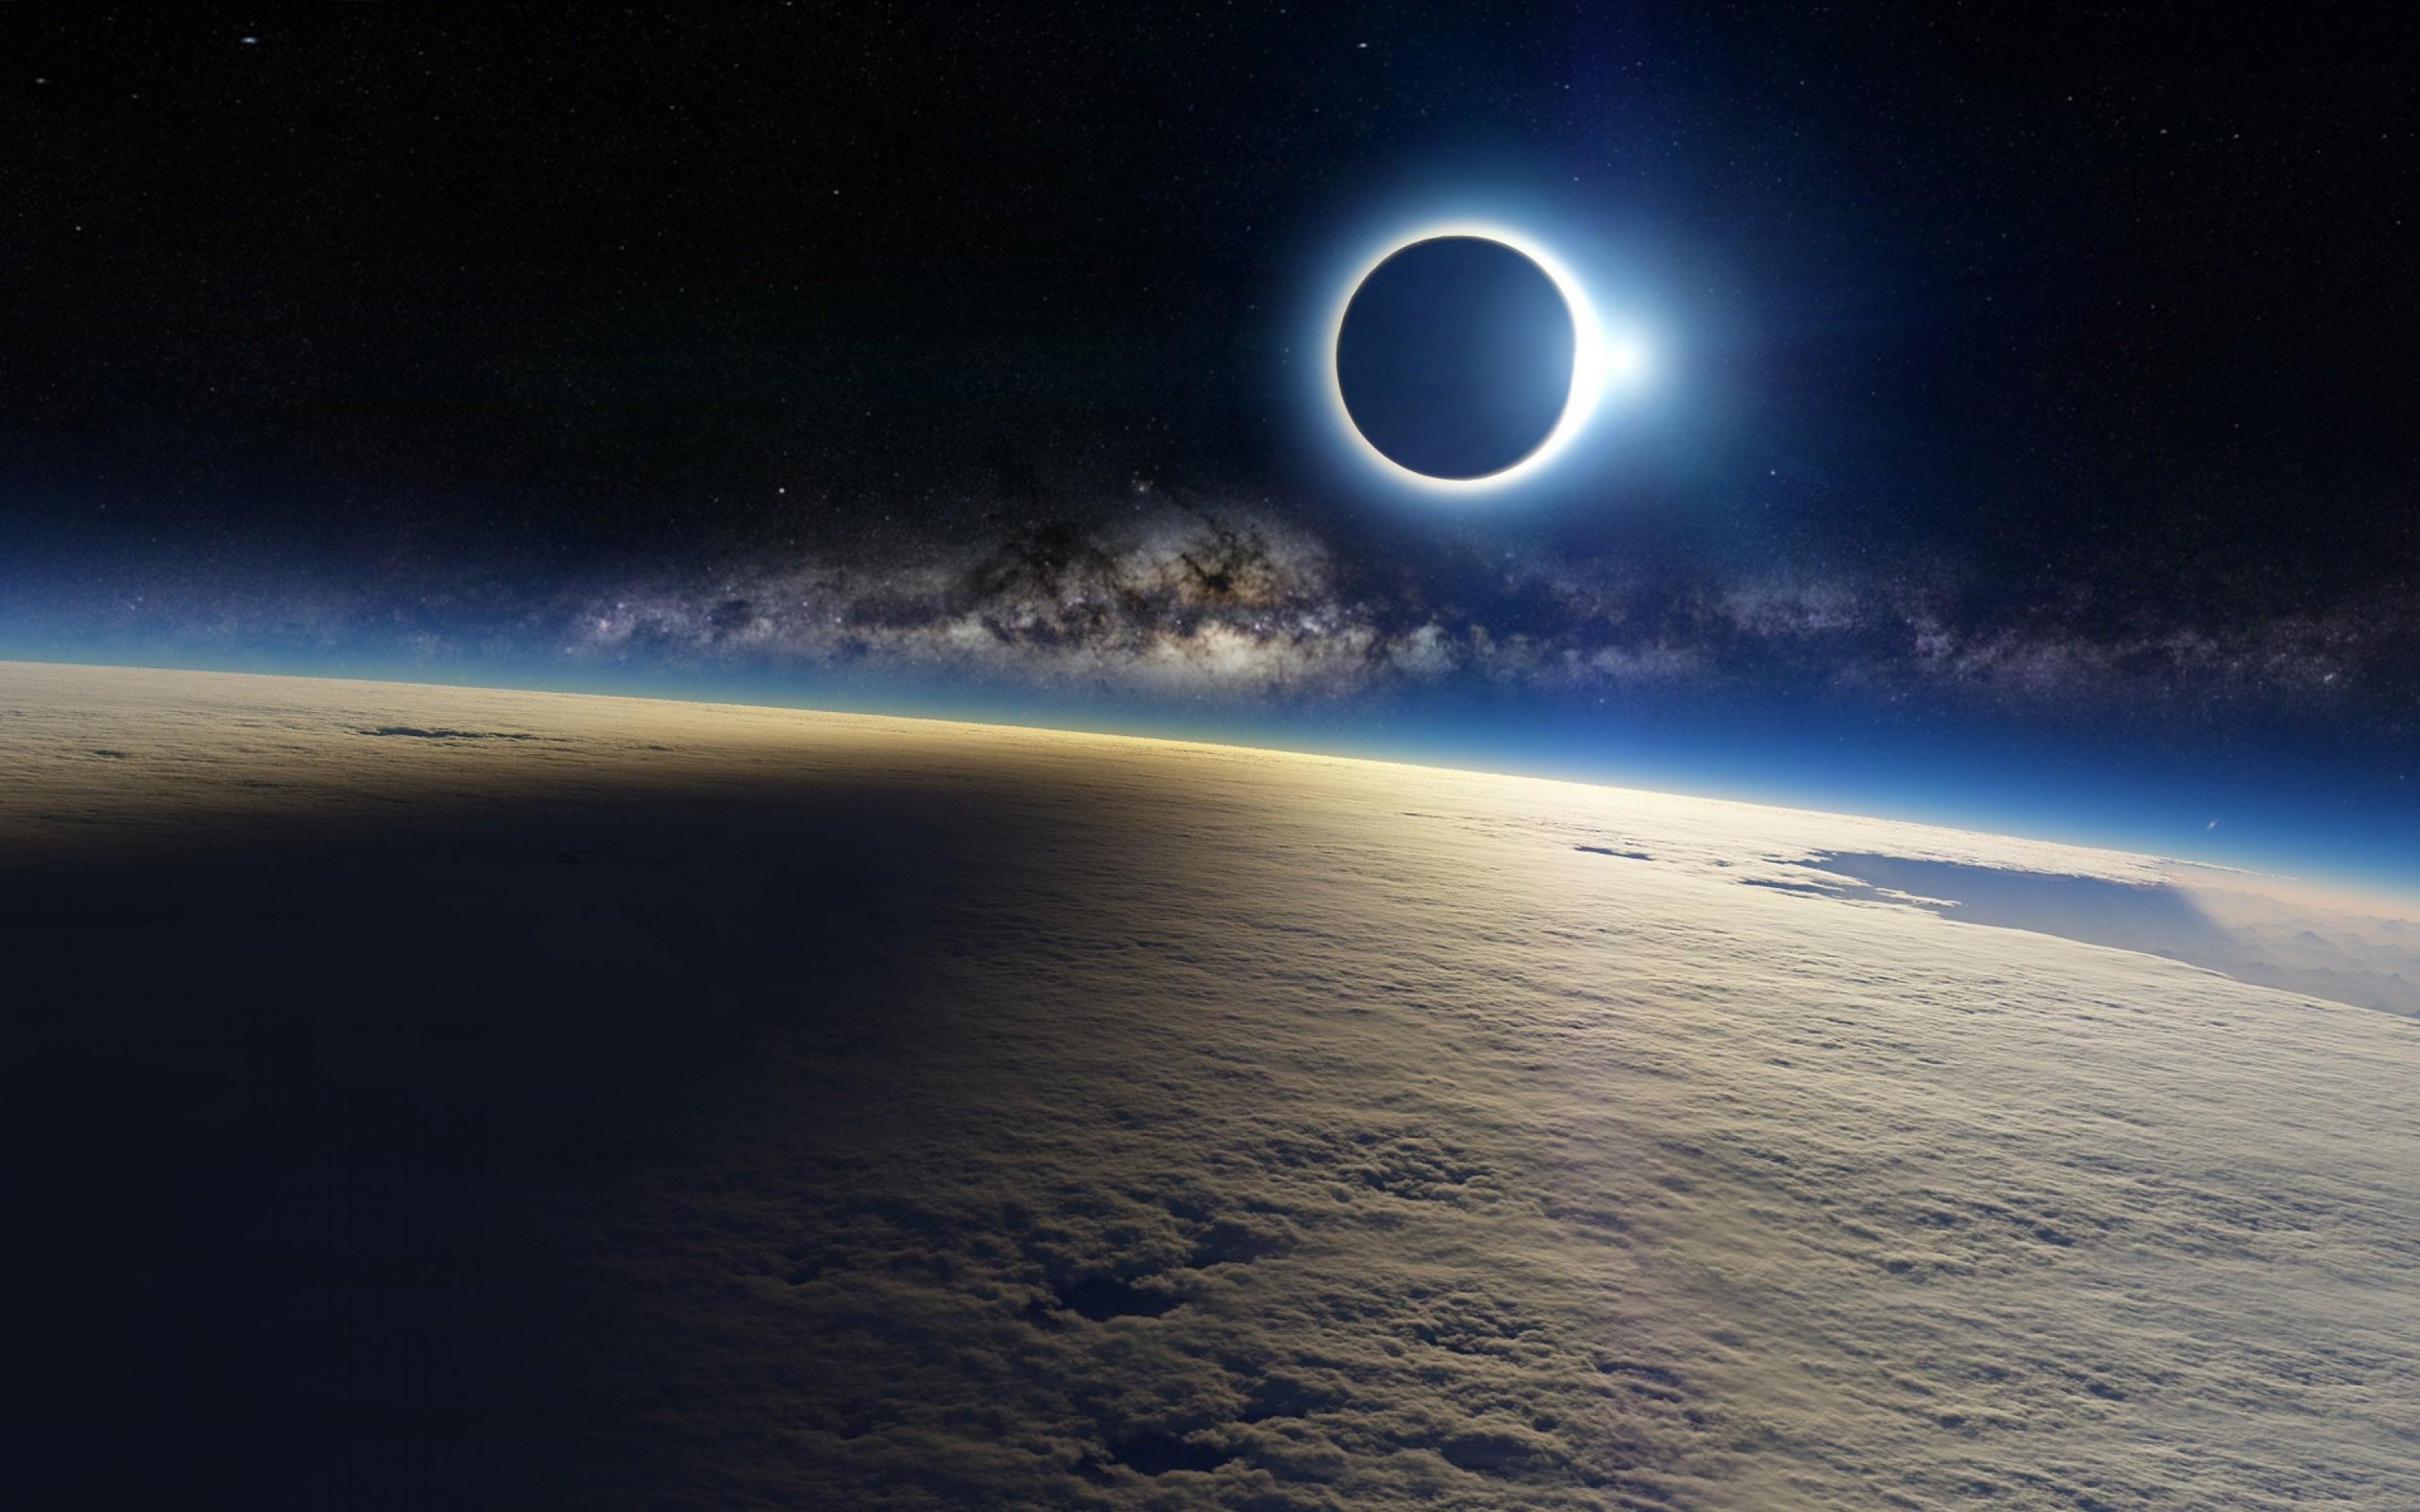 Solar Eclipse Wallpapers